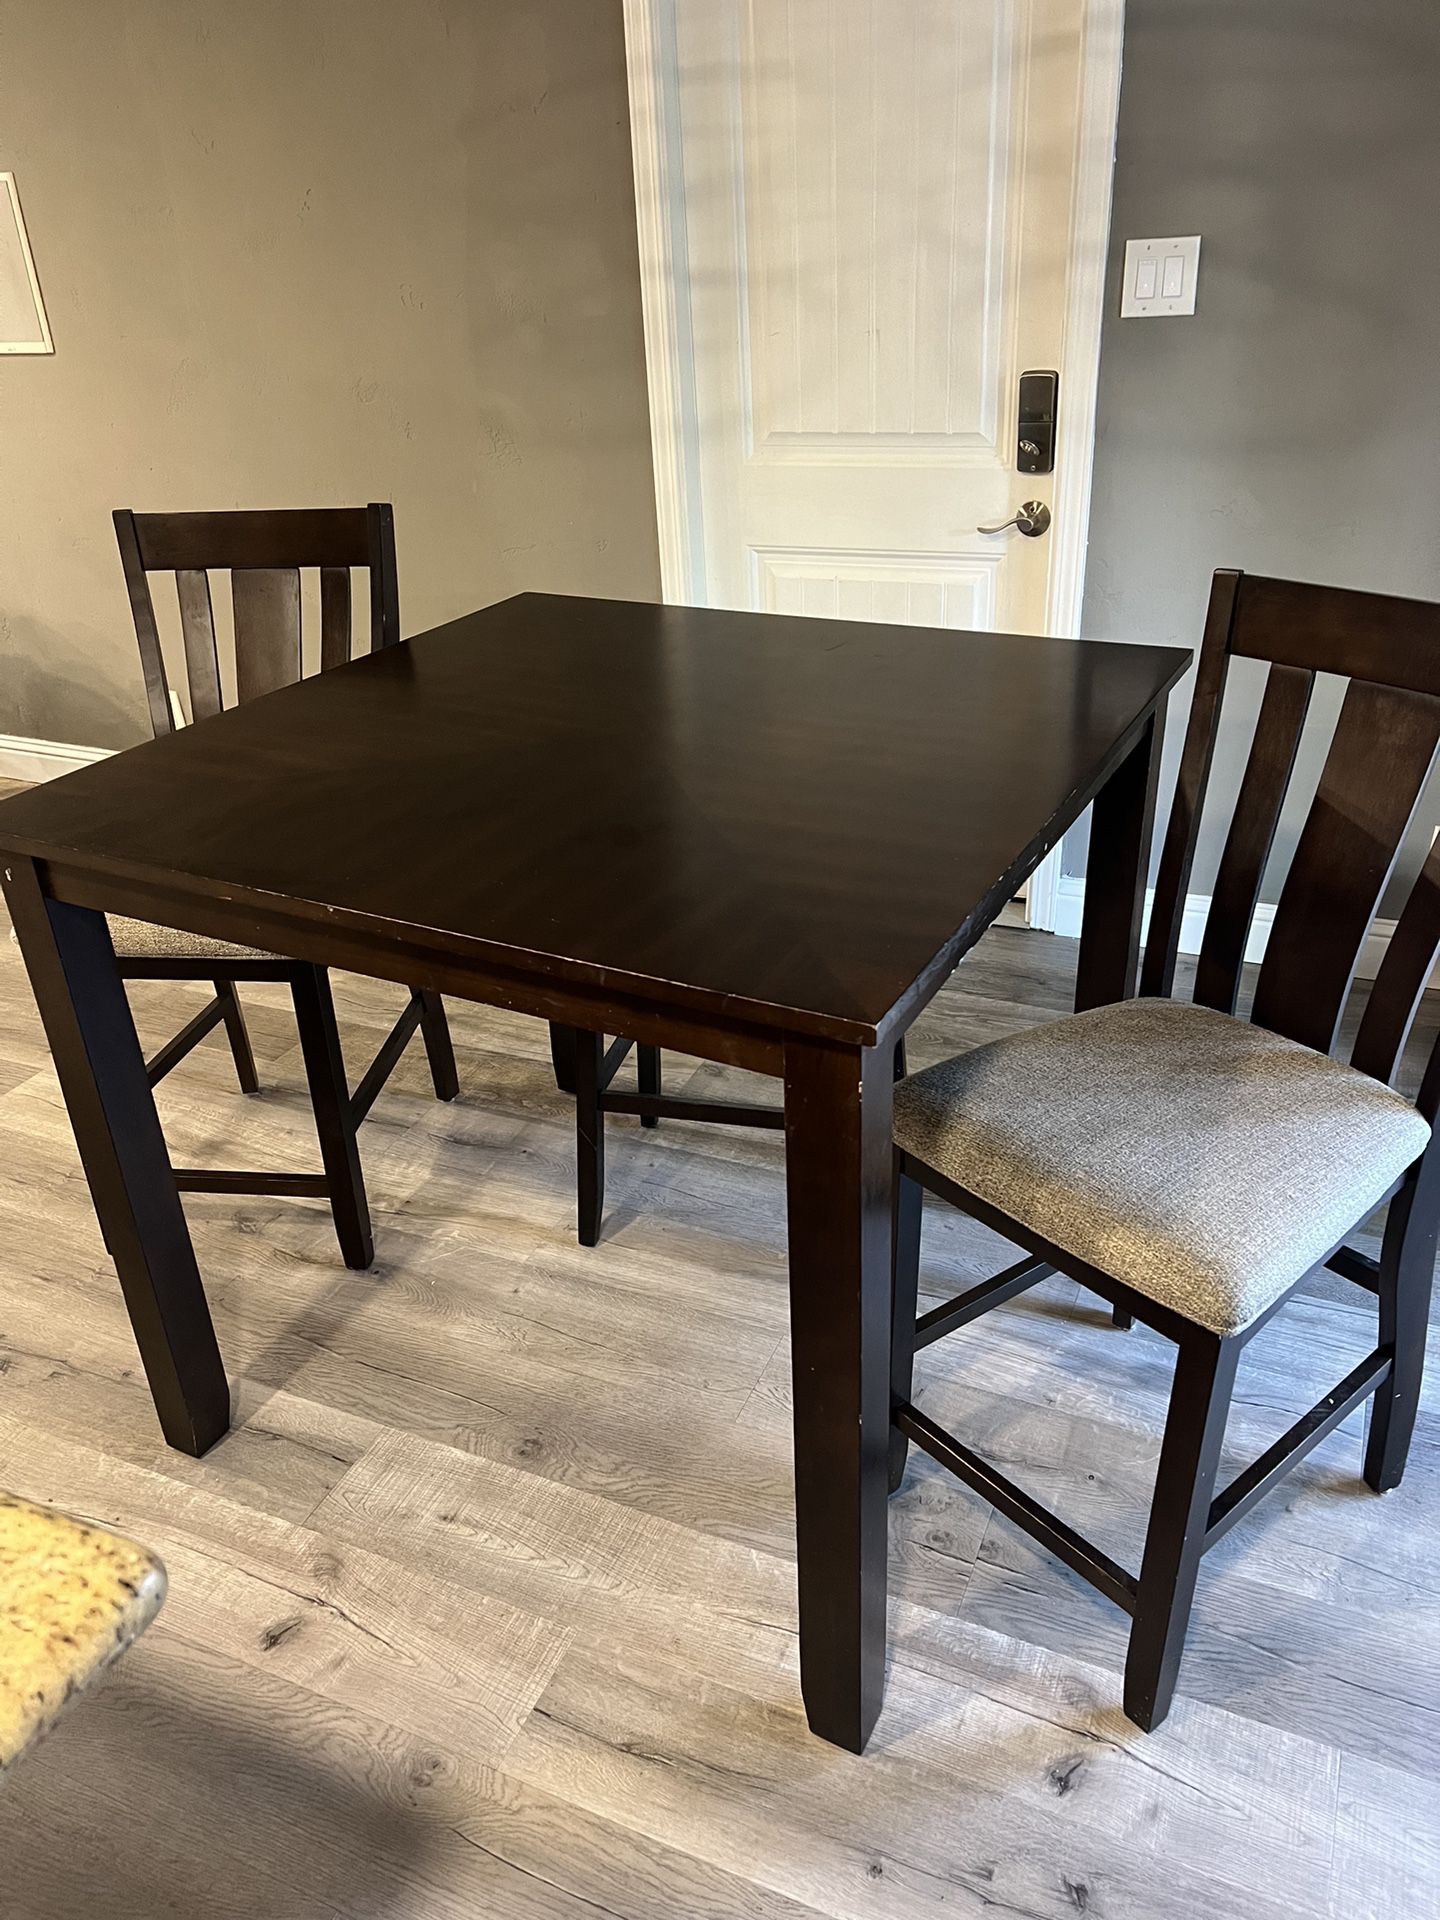 Dining Table With Chairs Pub Style 